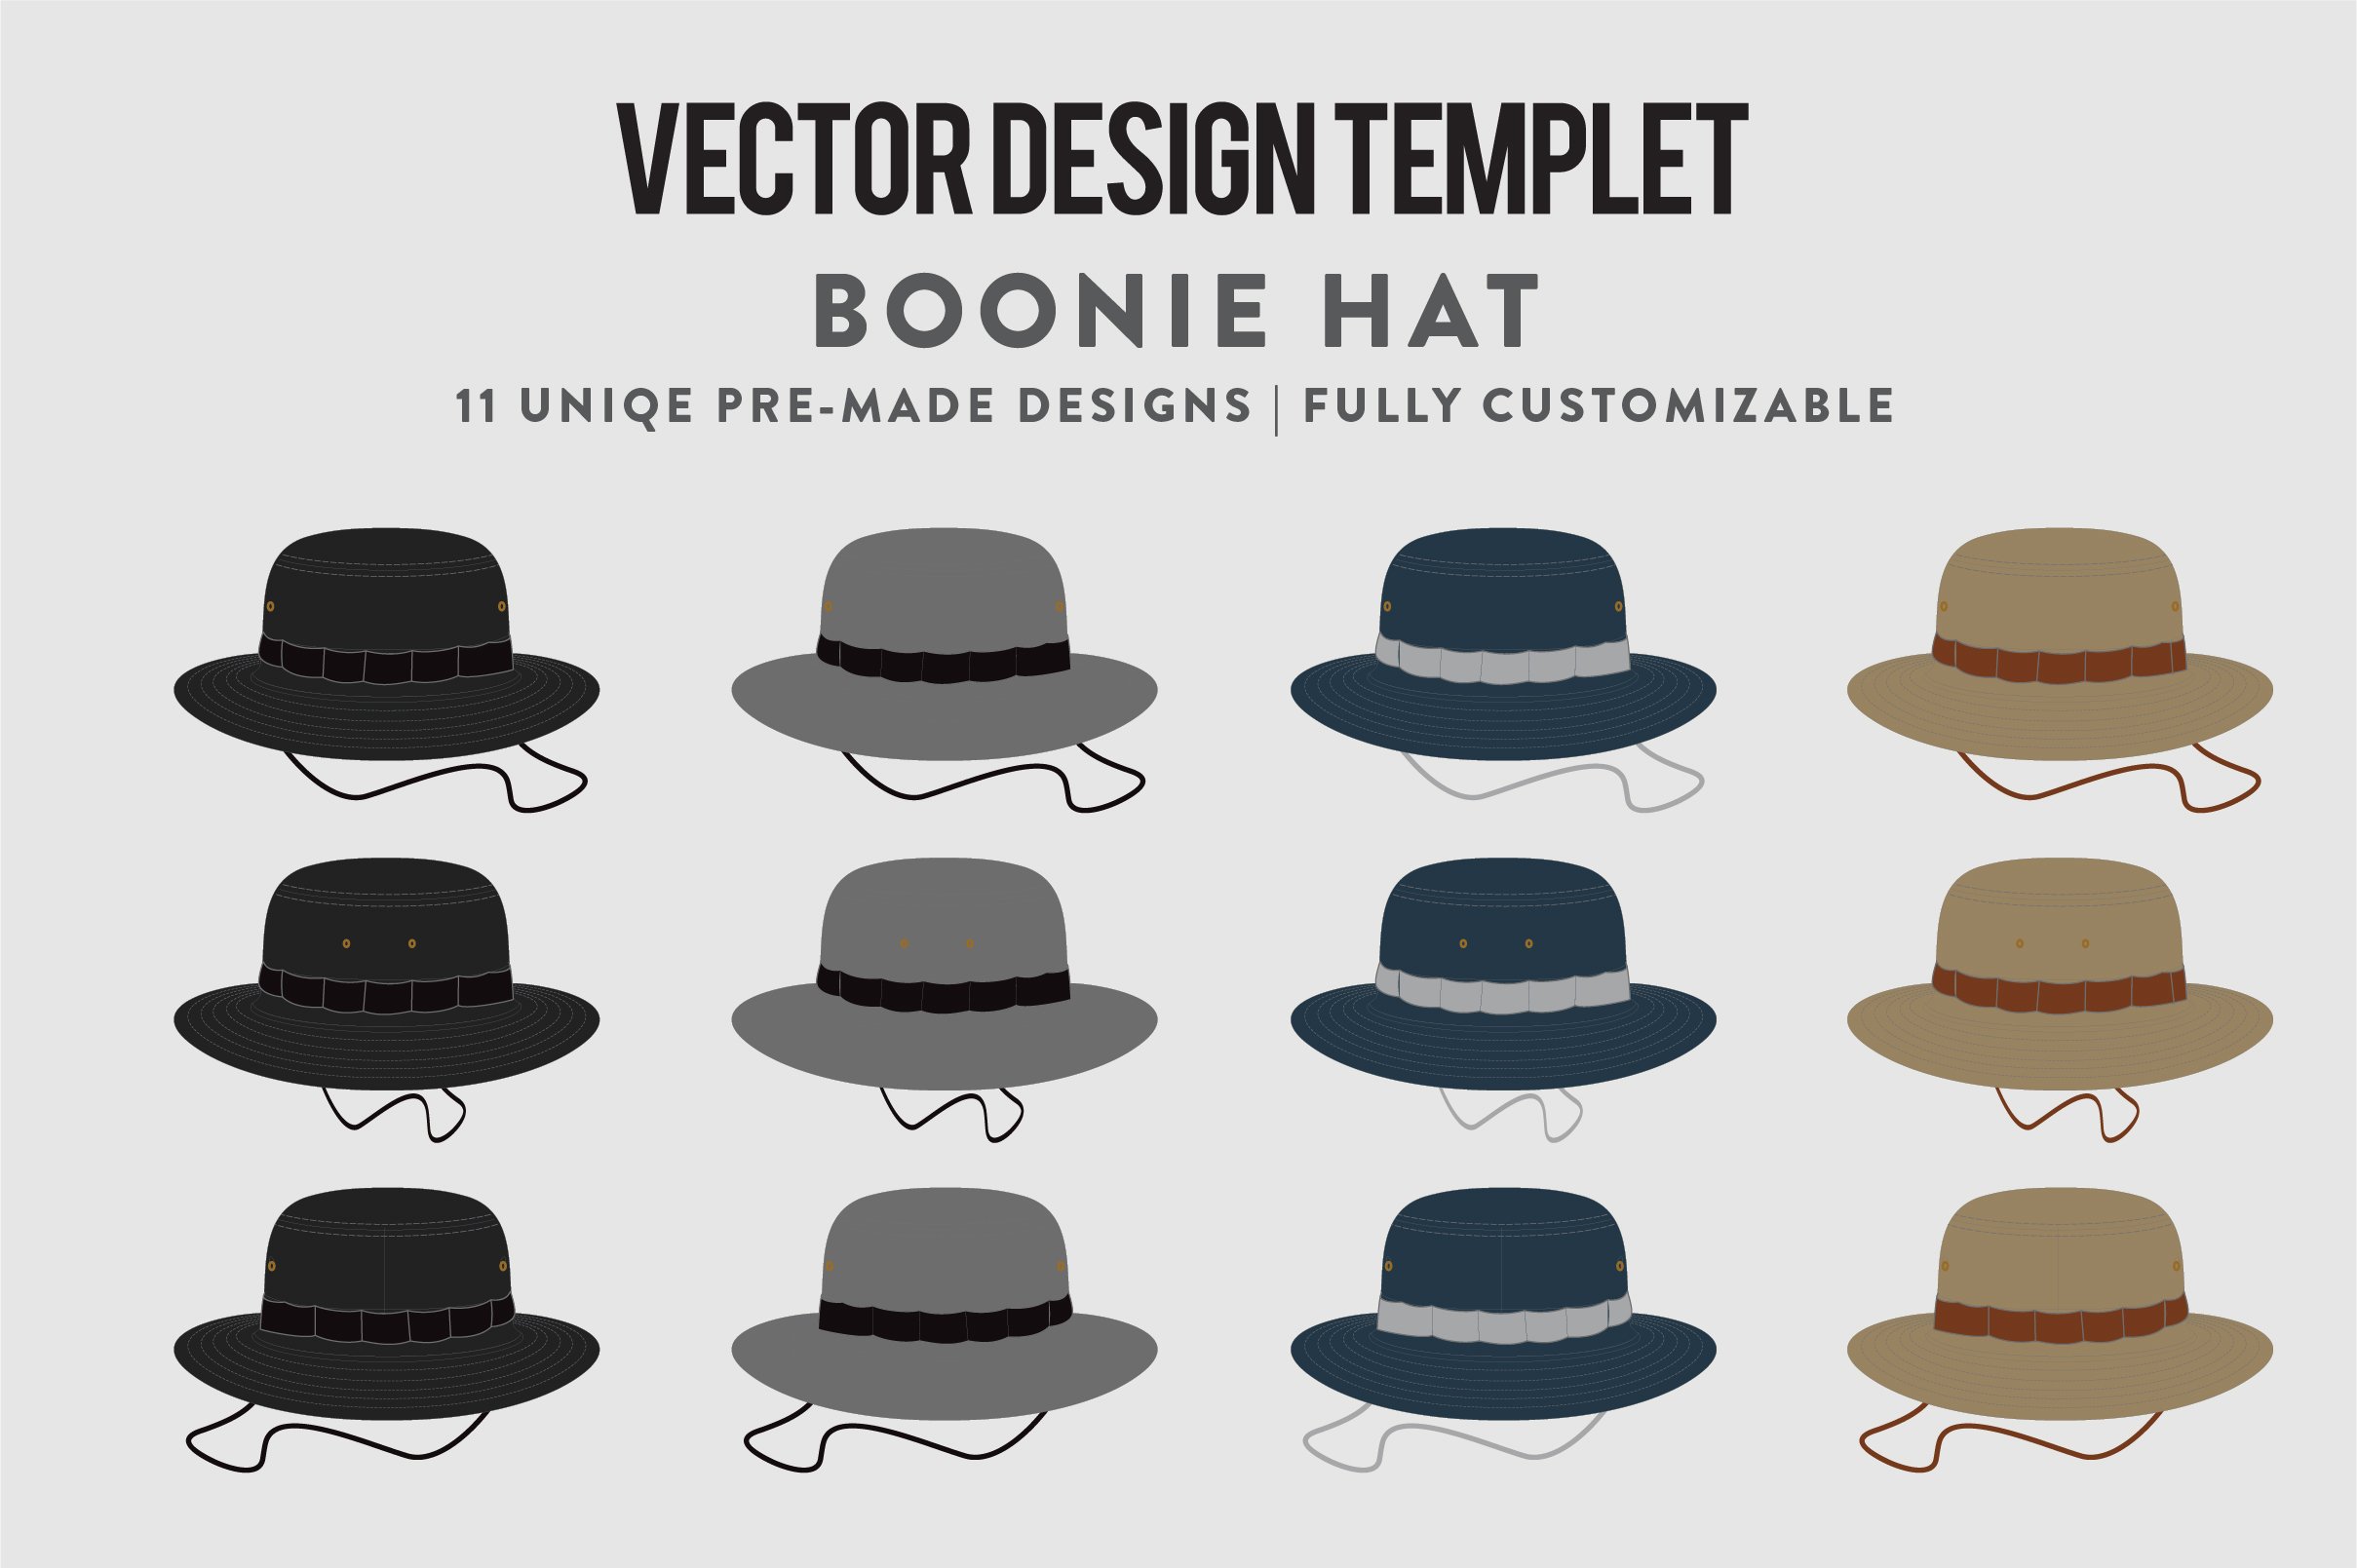 Hat Template - Boonie Hat cover image.